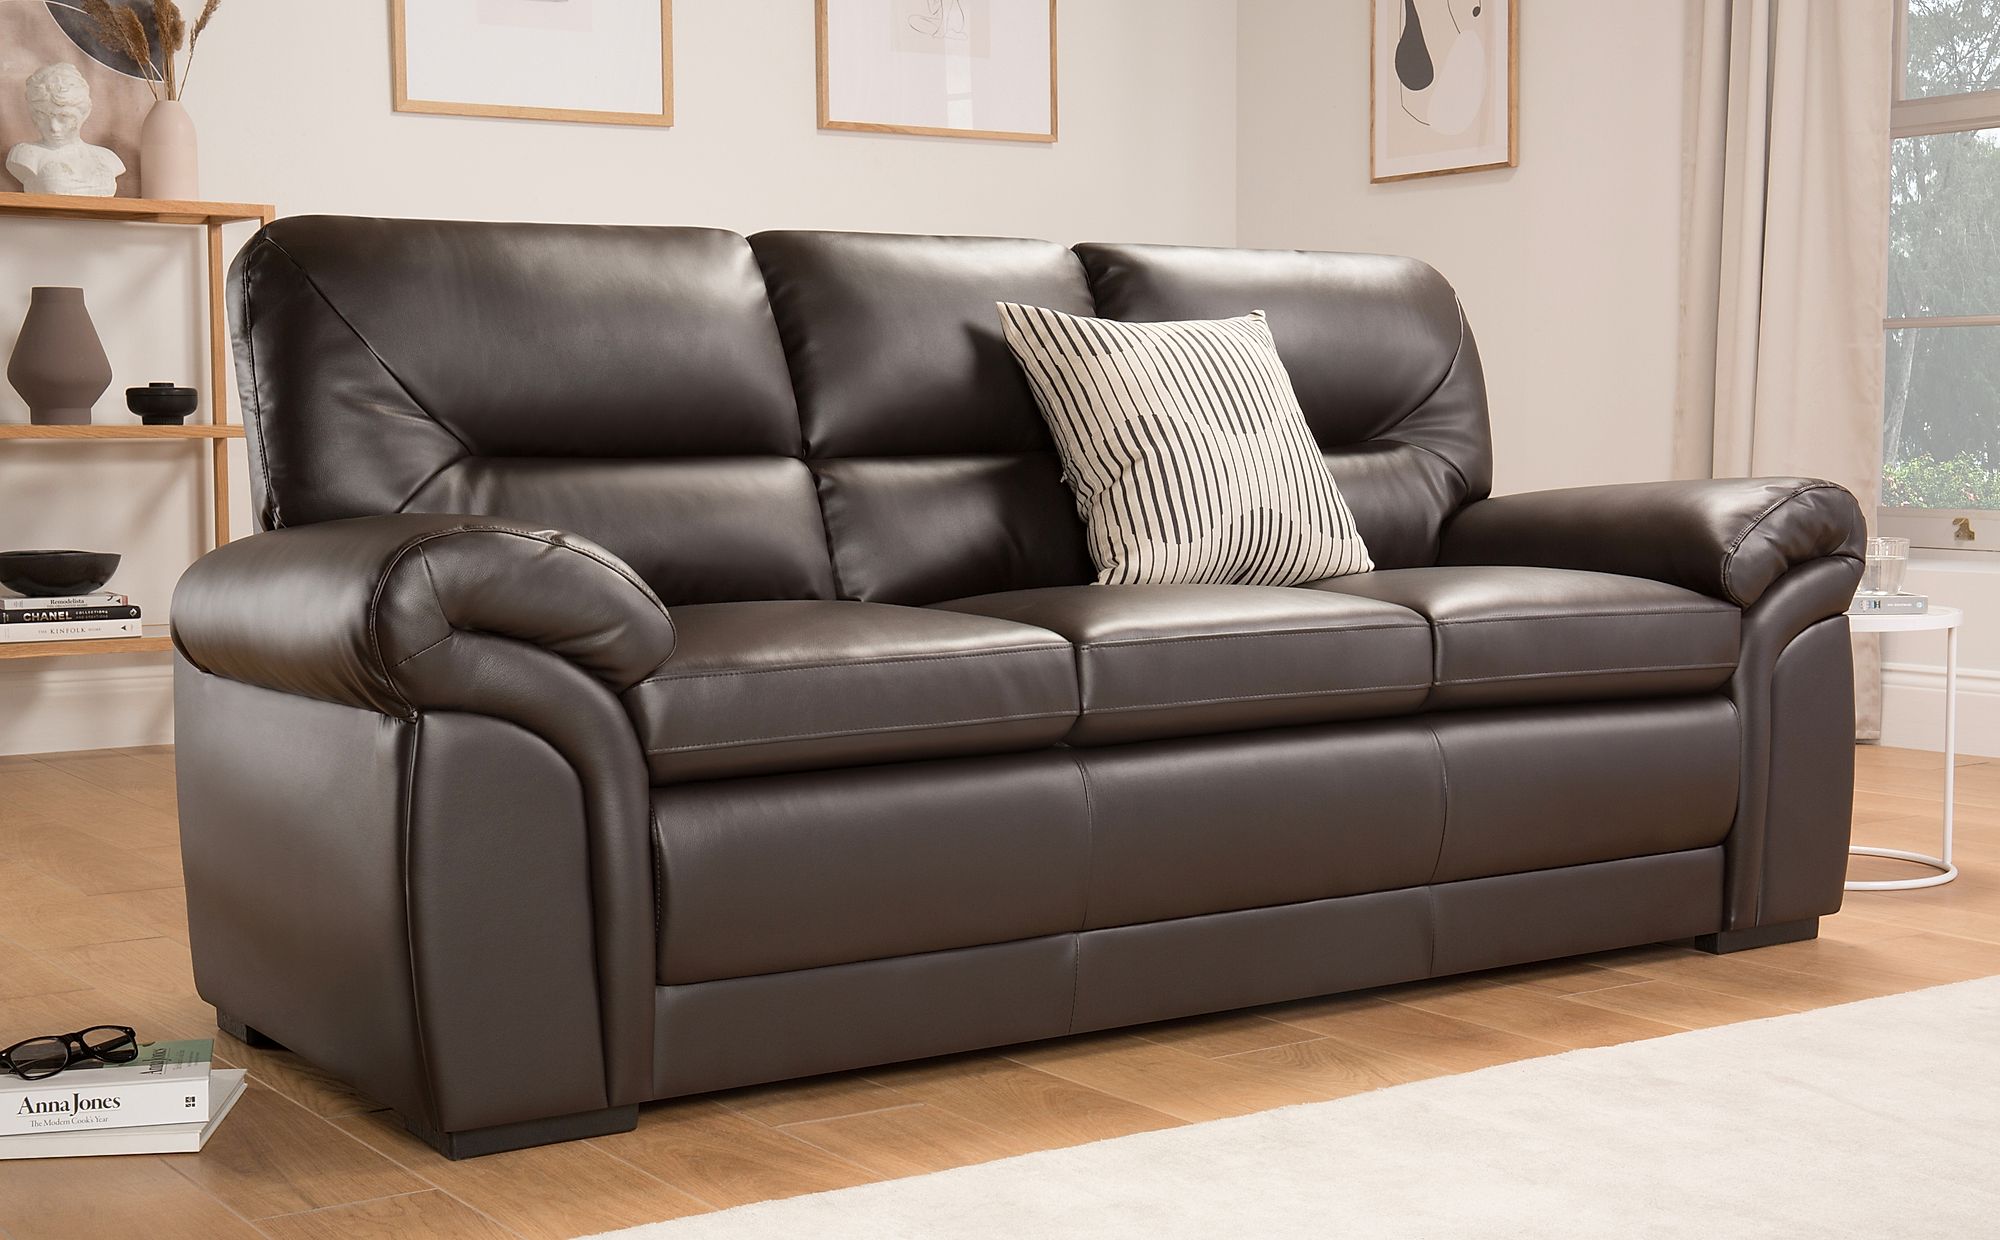 brown leather 3 seater sofa and chair